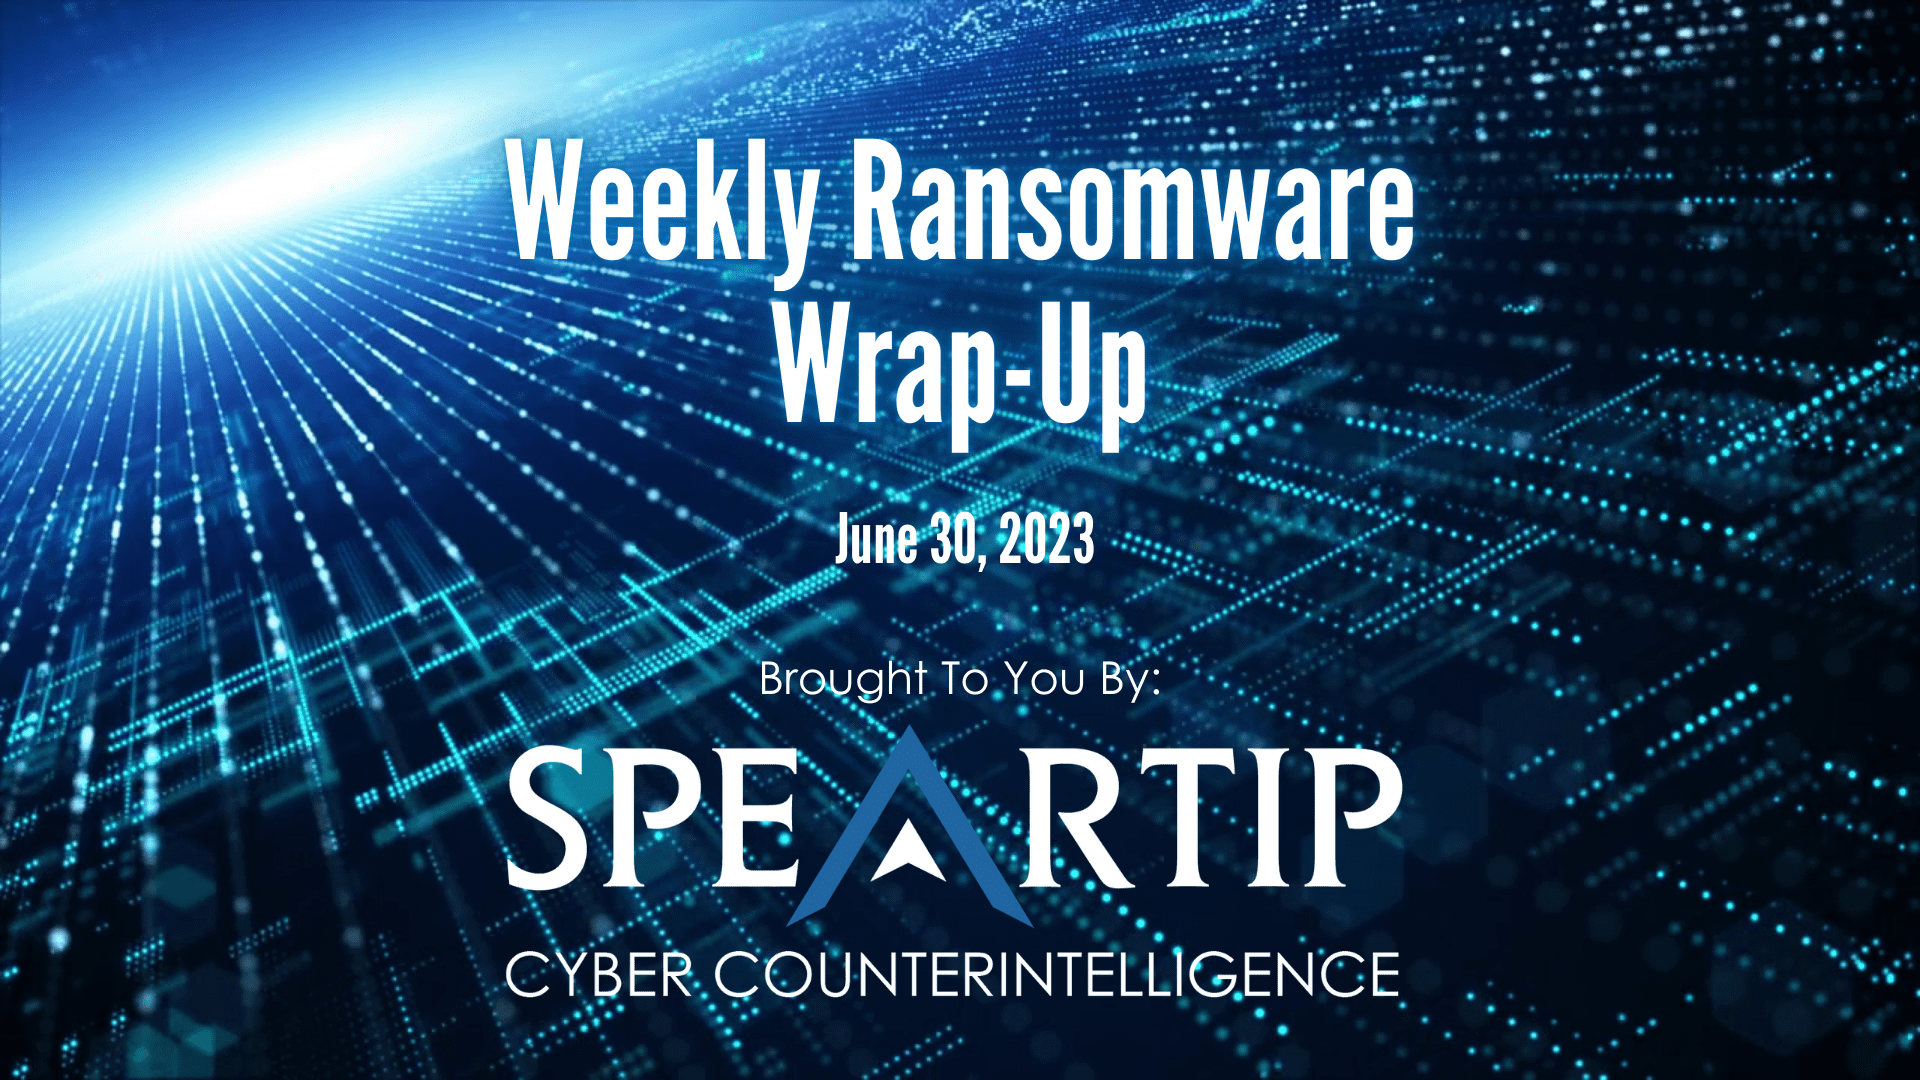 June-30-2023-Weekly Ransomware Wrap-up